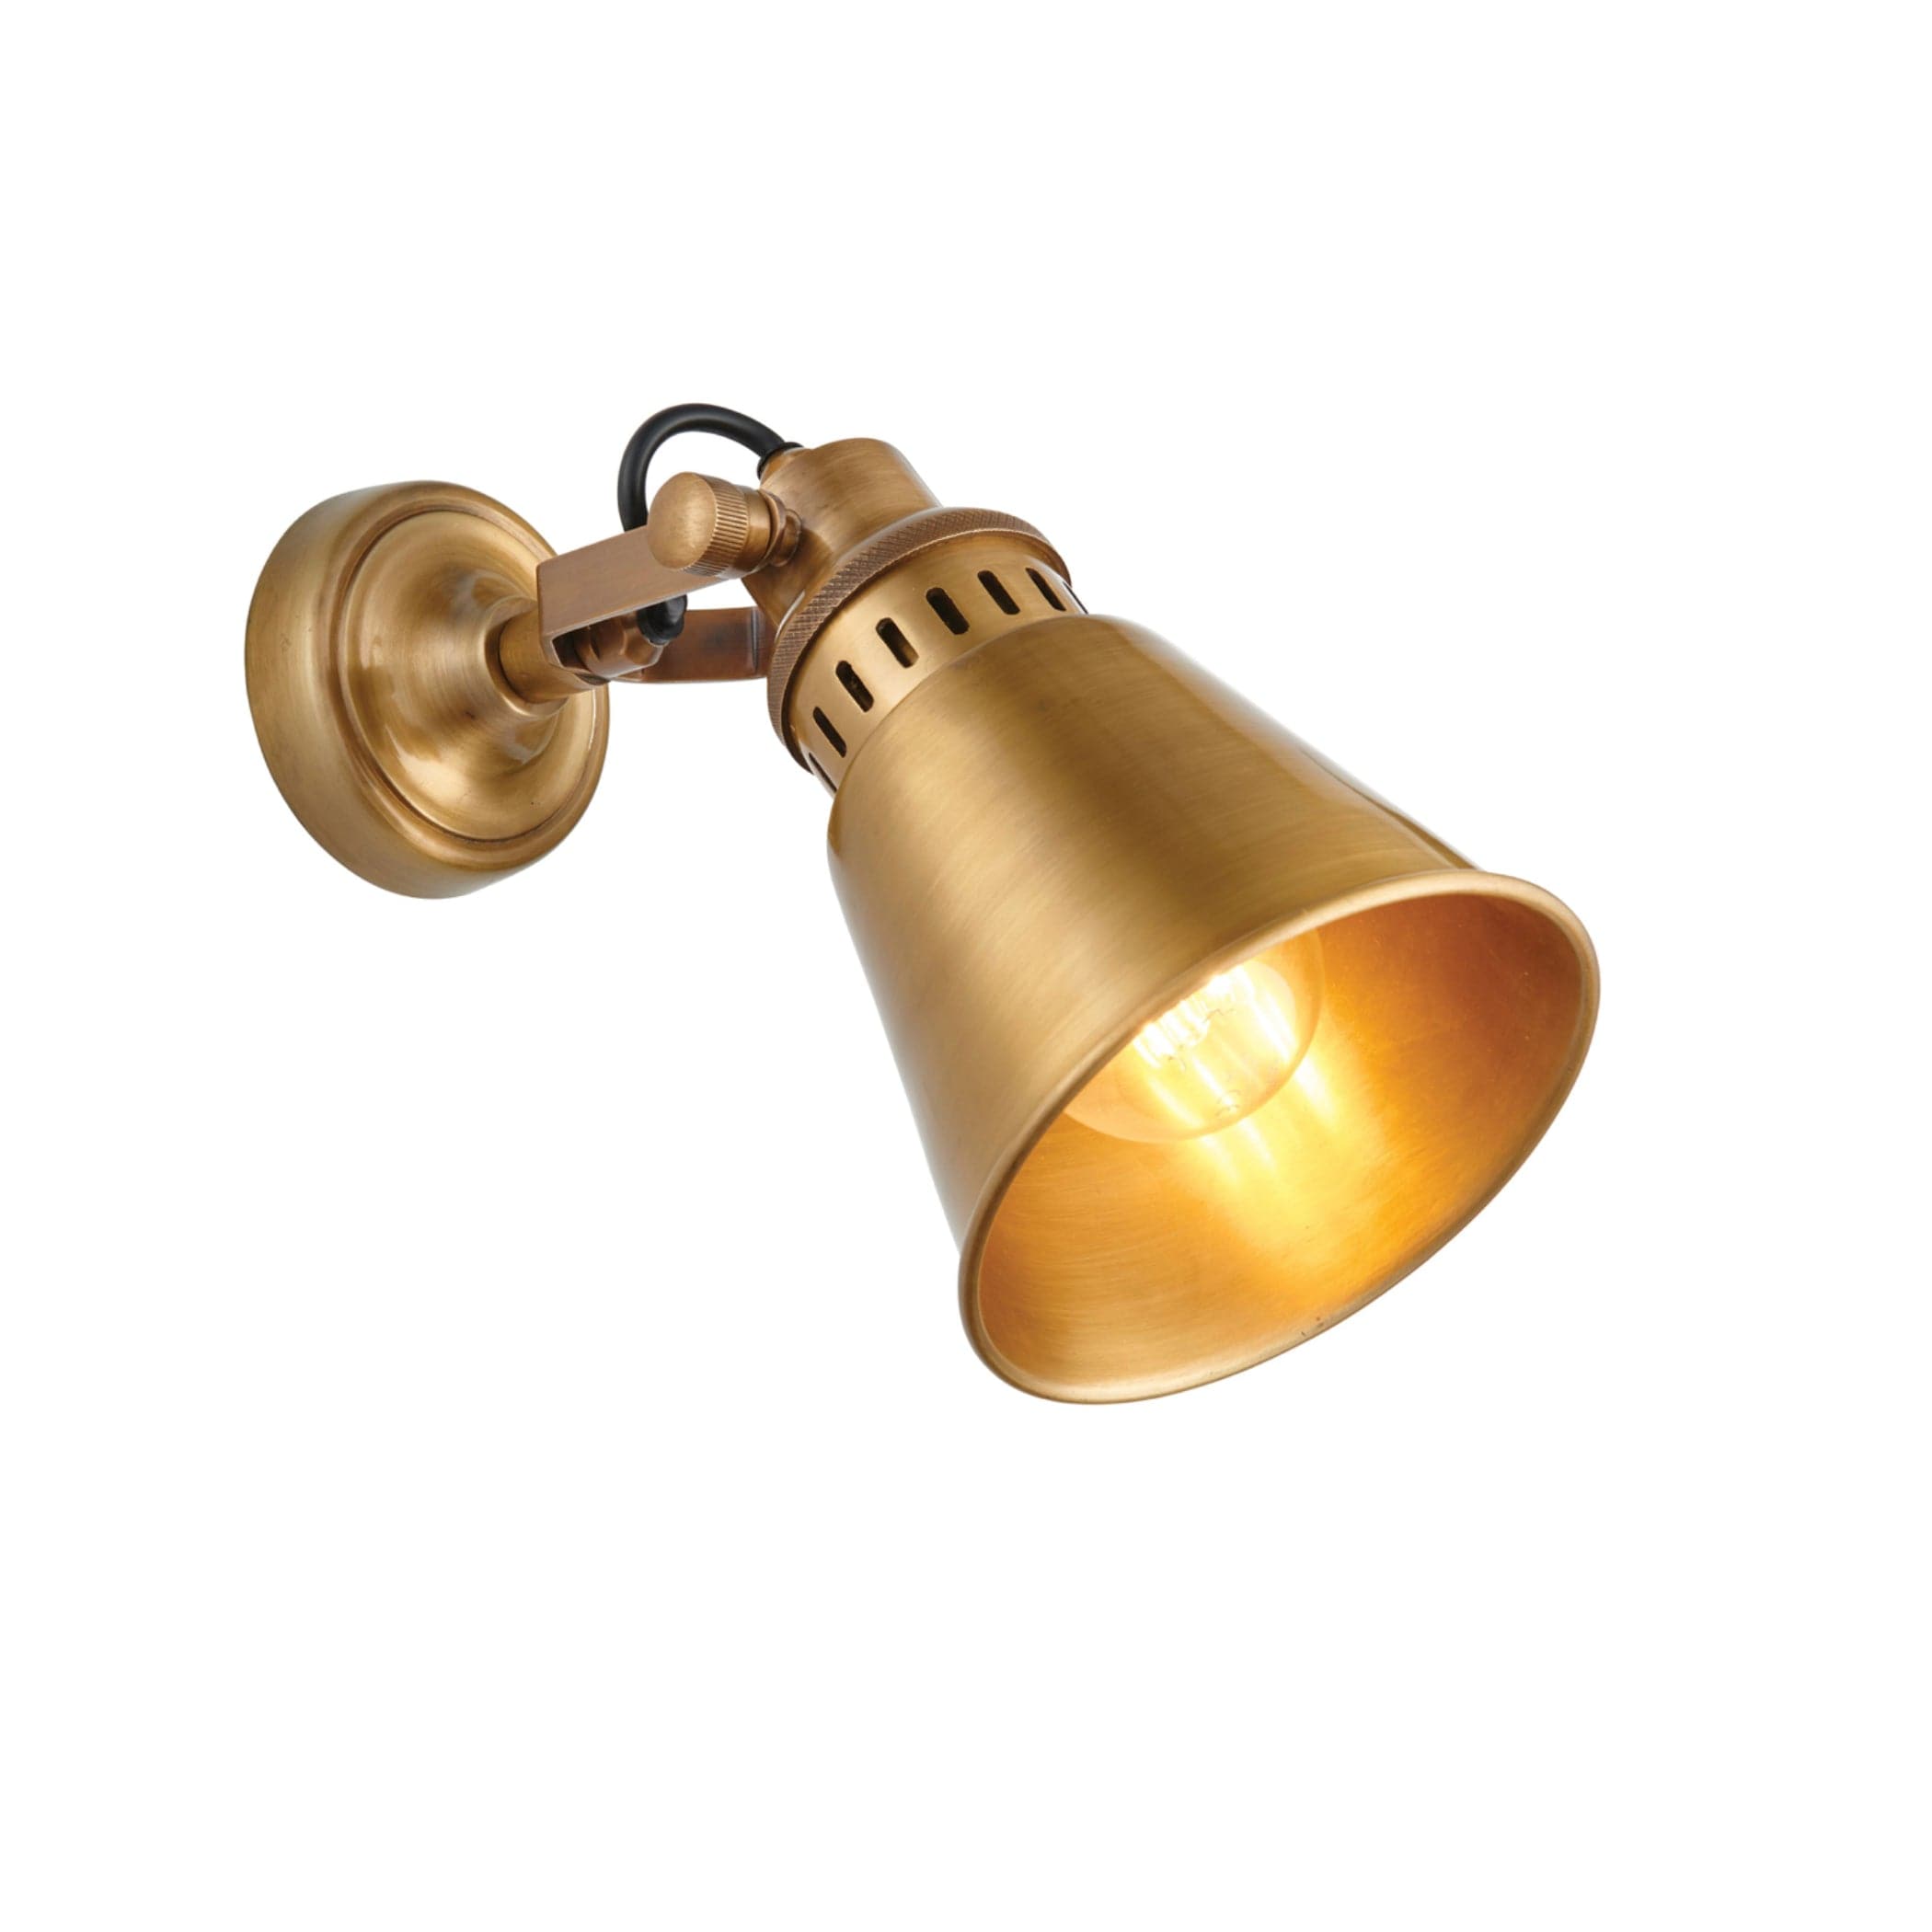 Antiqued Brass vintage style Wall Light 3